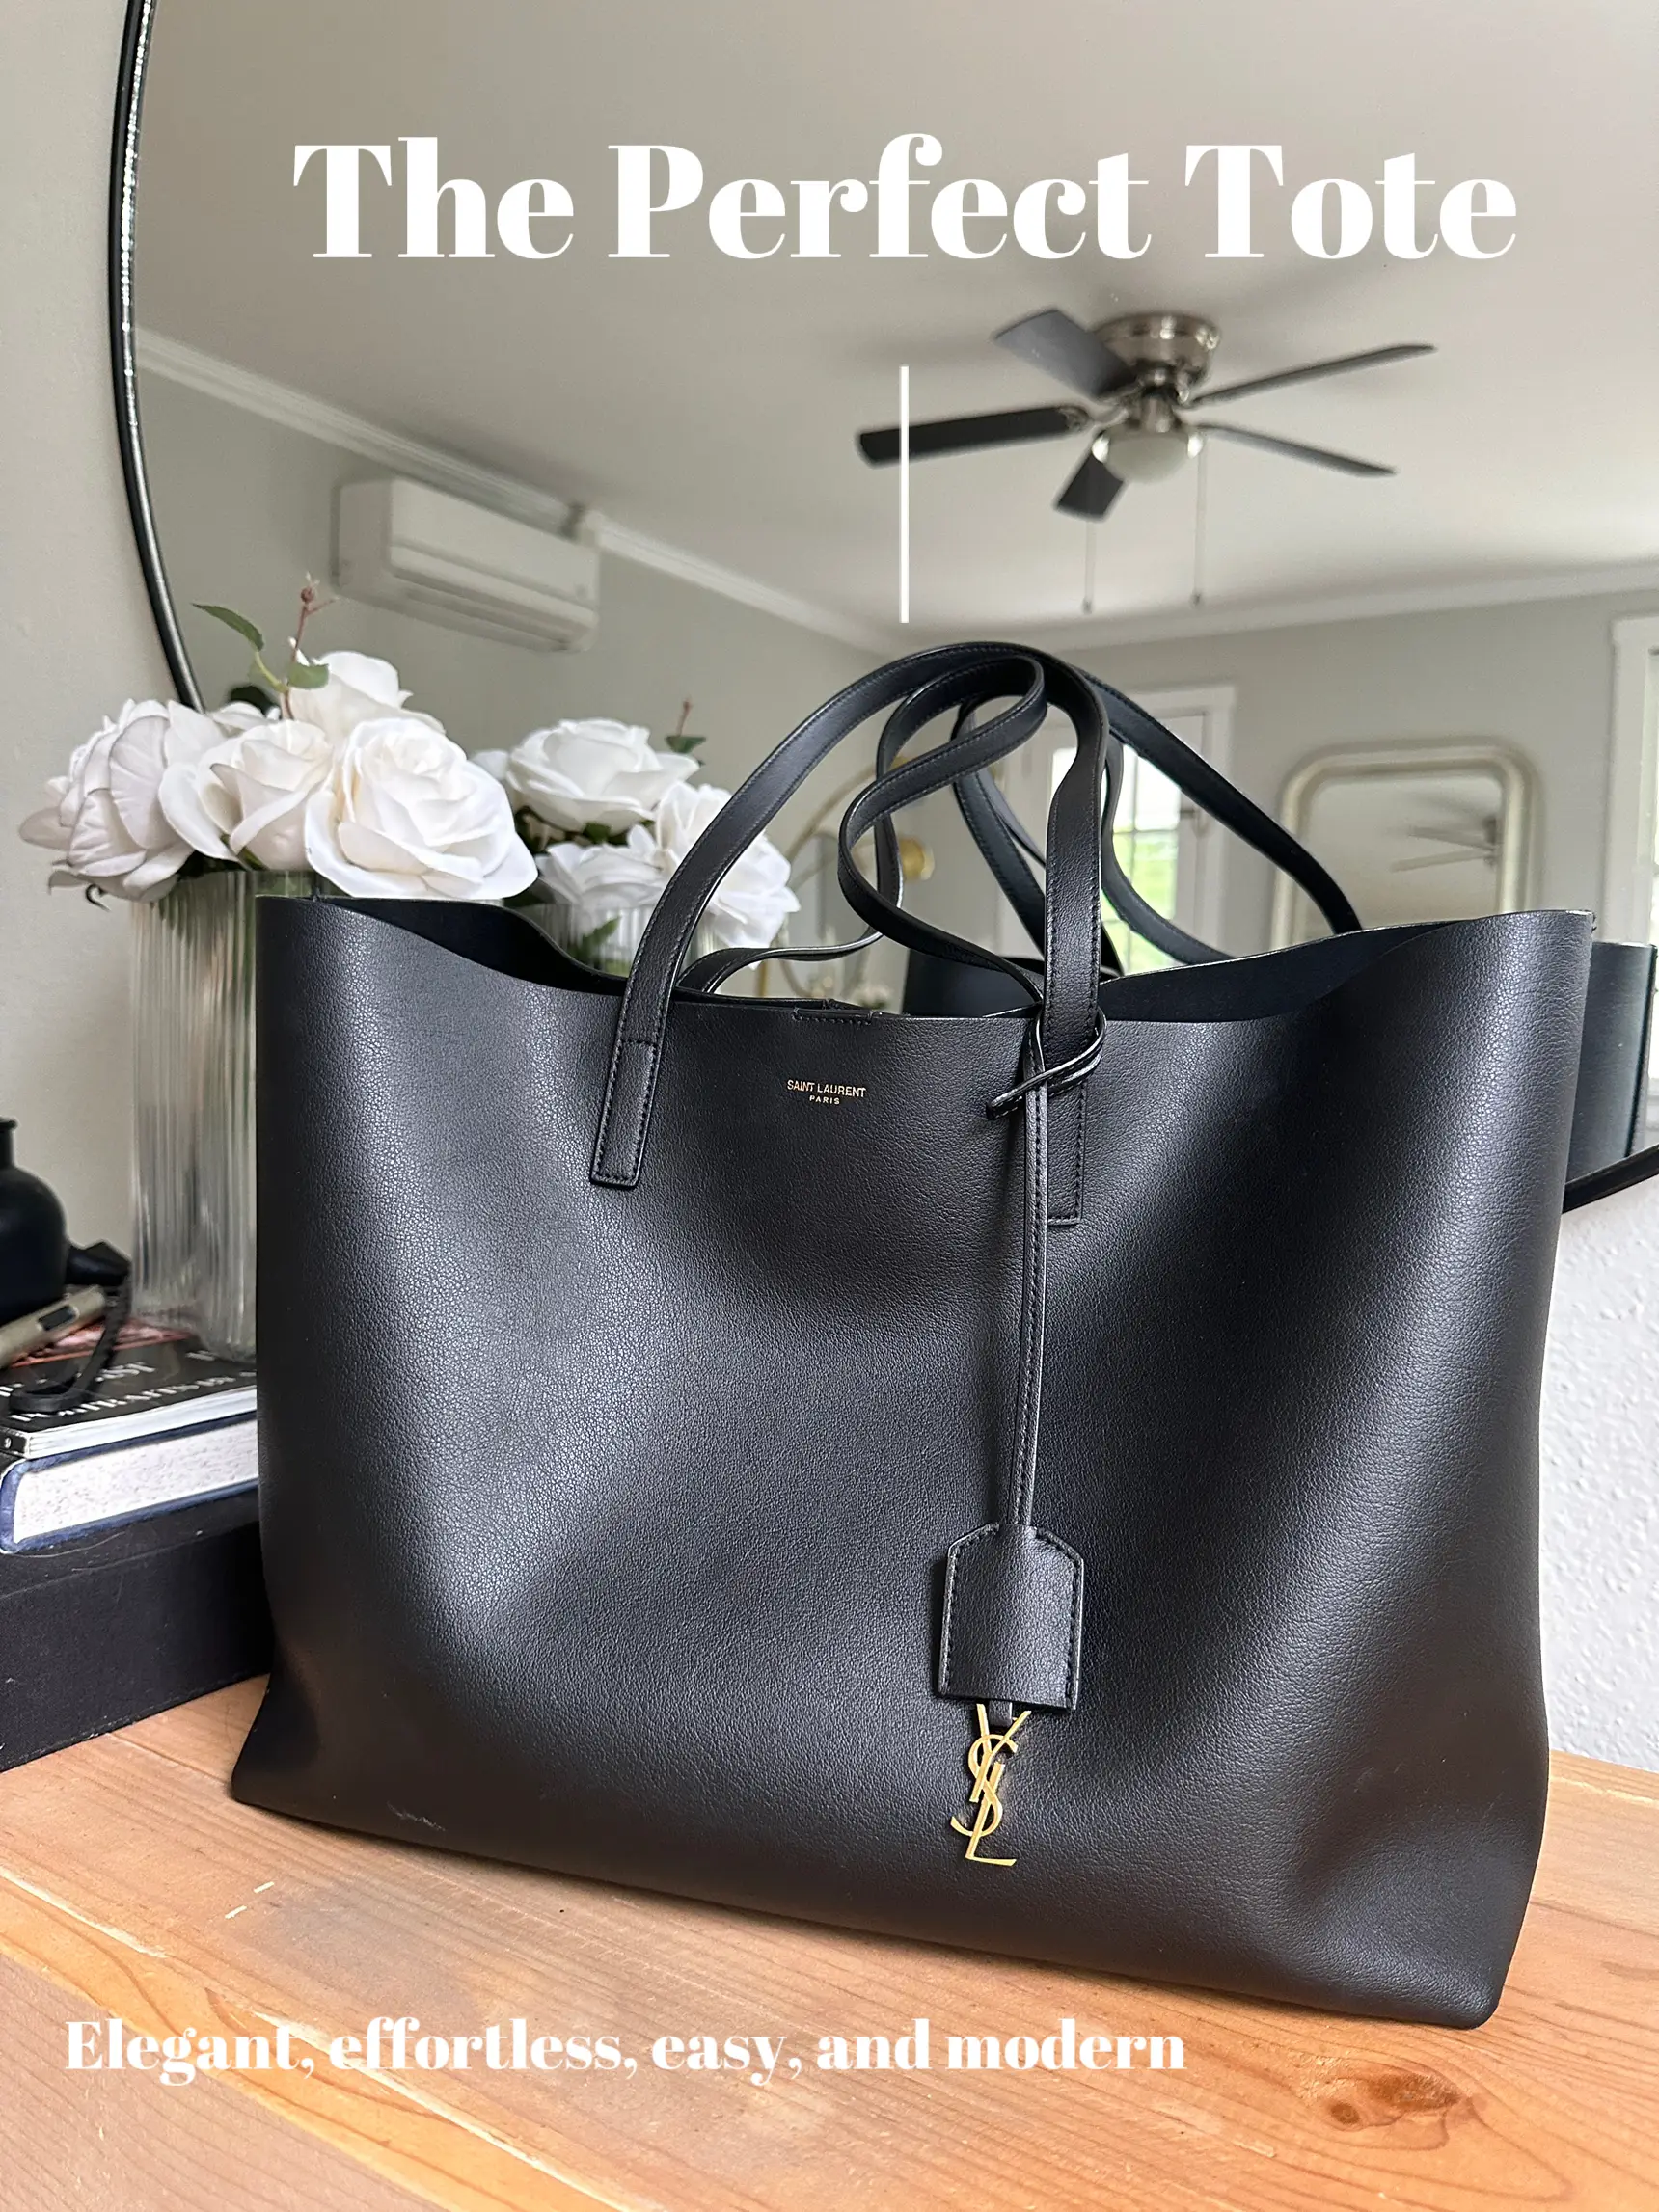 Pink April Diary - Saint Laurent Leather Tote Bag Complete Review